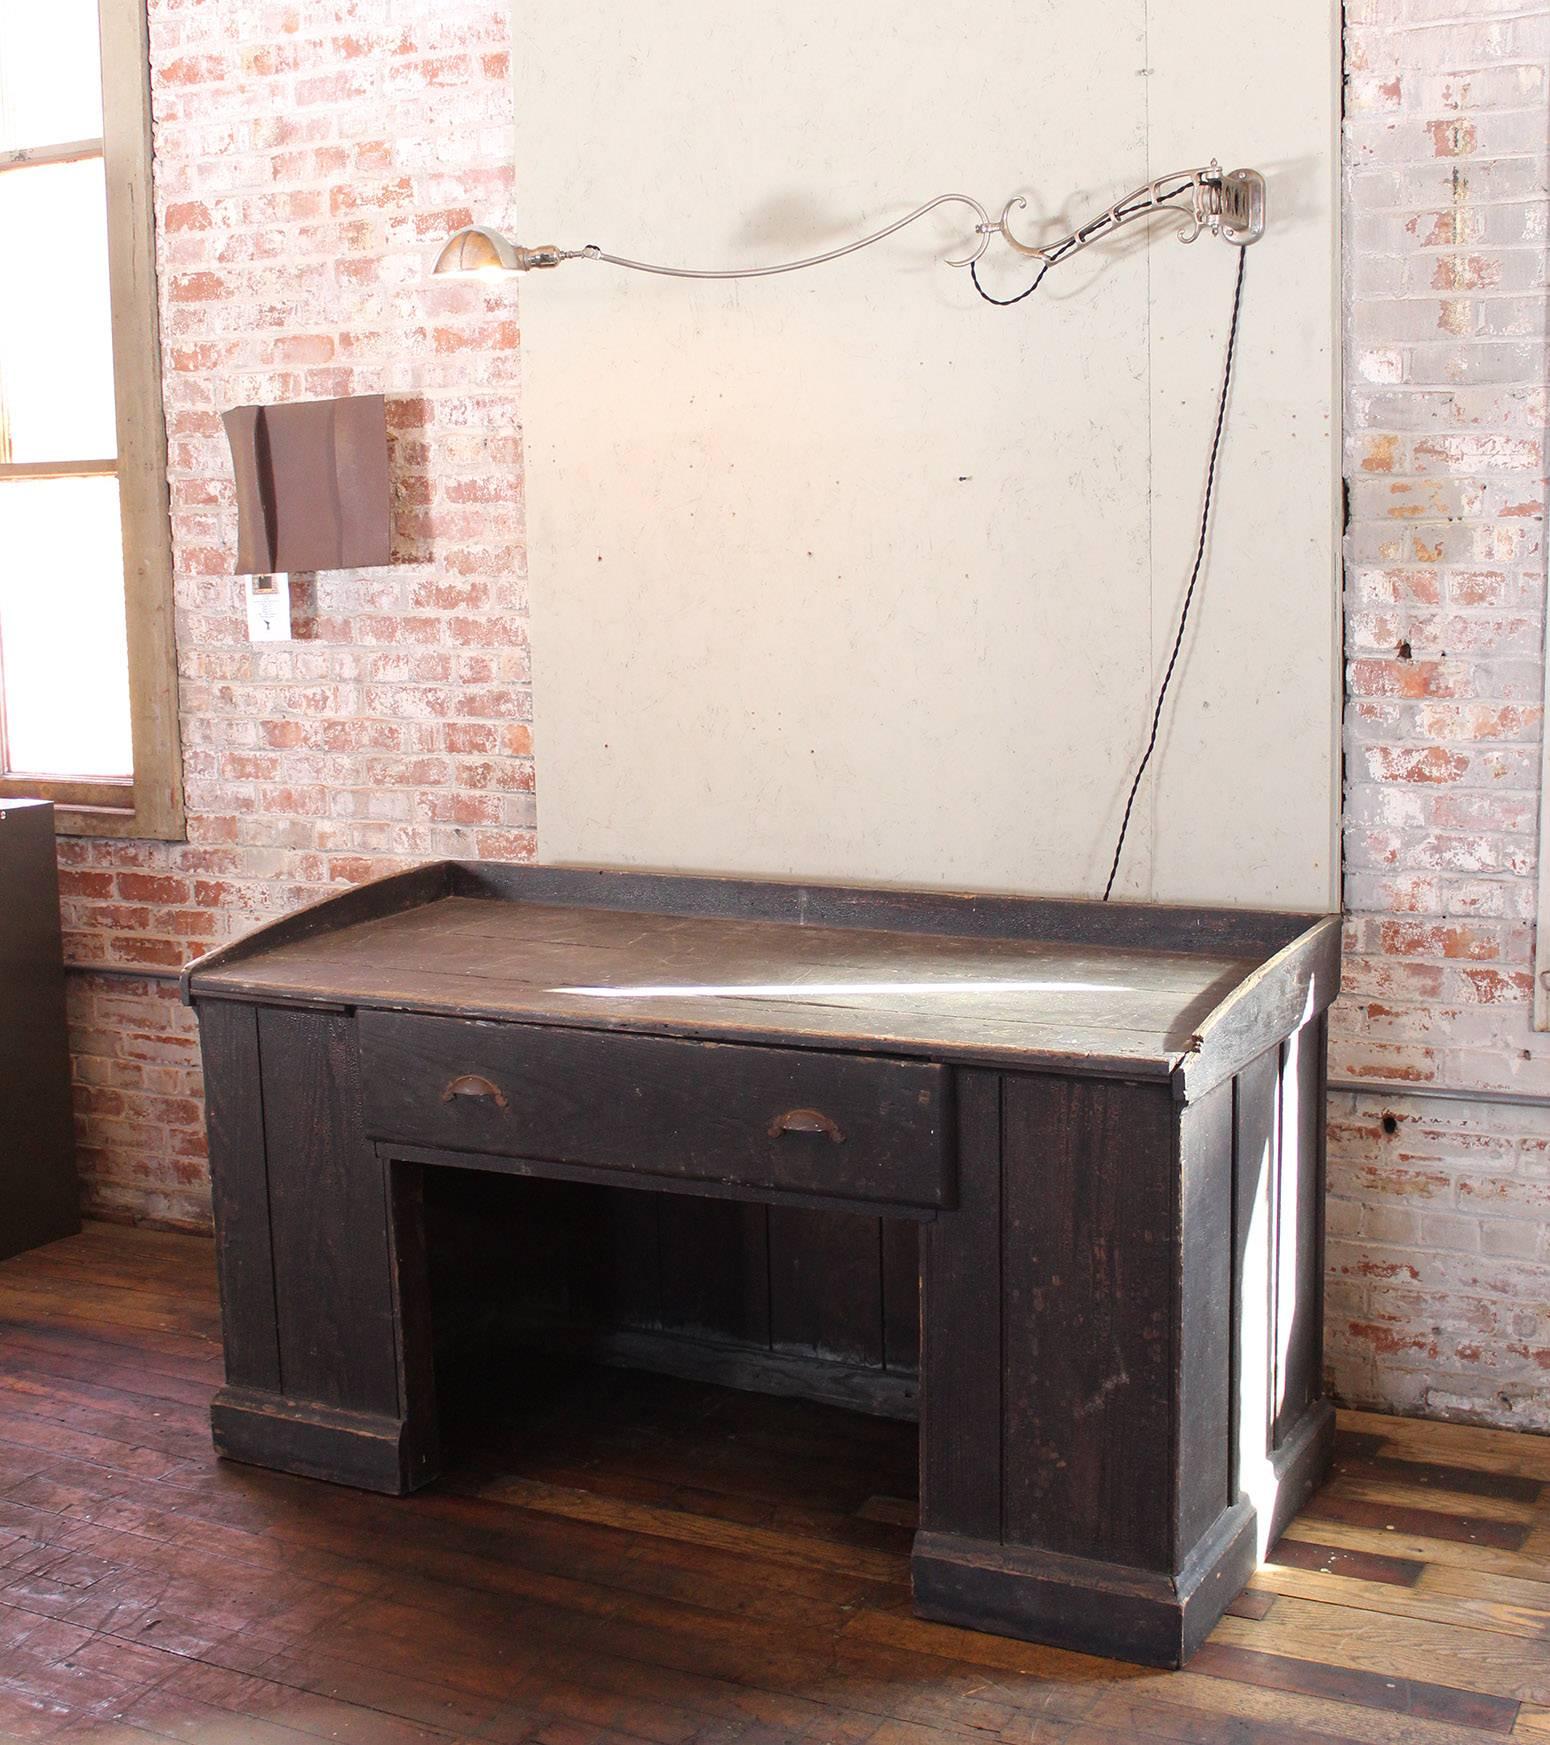 Exceptional wooden store hardware counter, vintage Industrial clerks desk with steel handles. Dimensions - Overall - 65 1/4